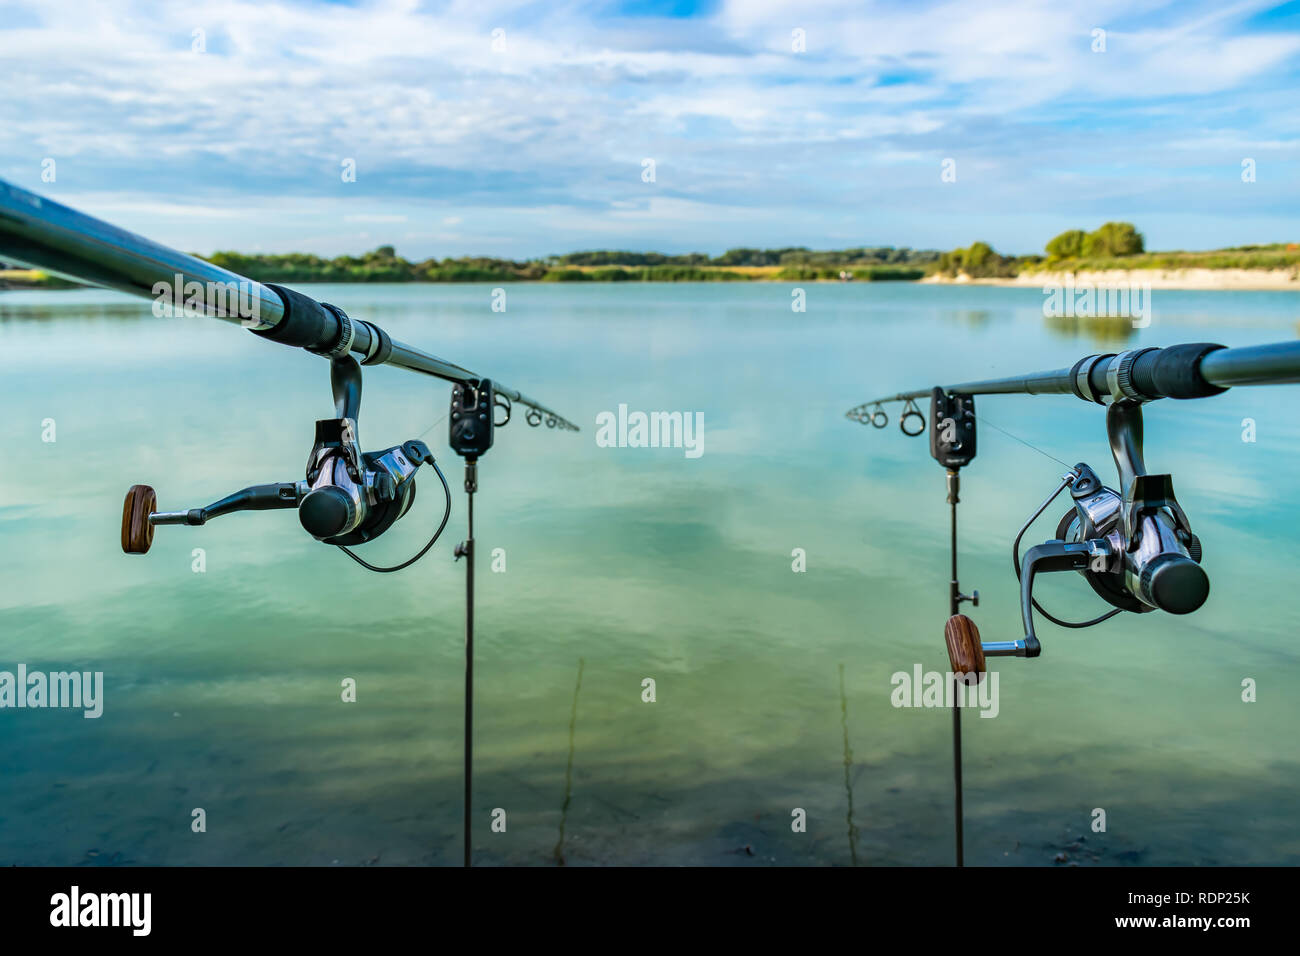 View of two fishing rods on stands with electronic lights on the background  of a beautiful green lake Stock Photo - Alamy